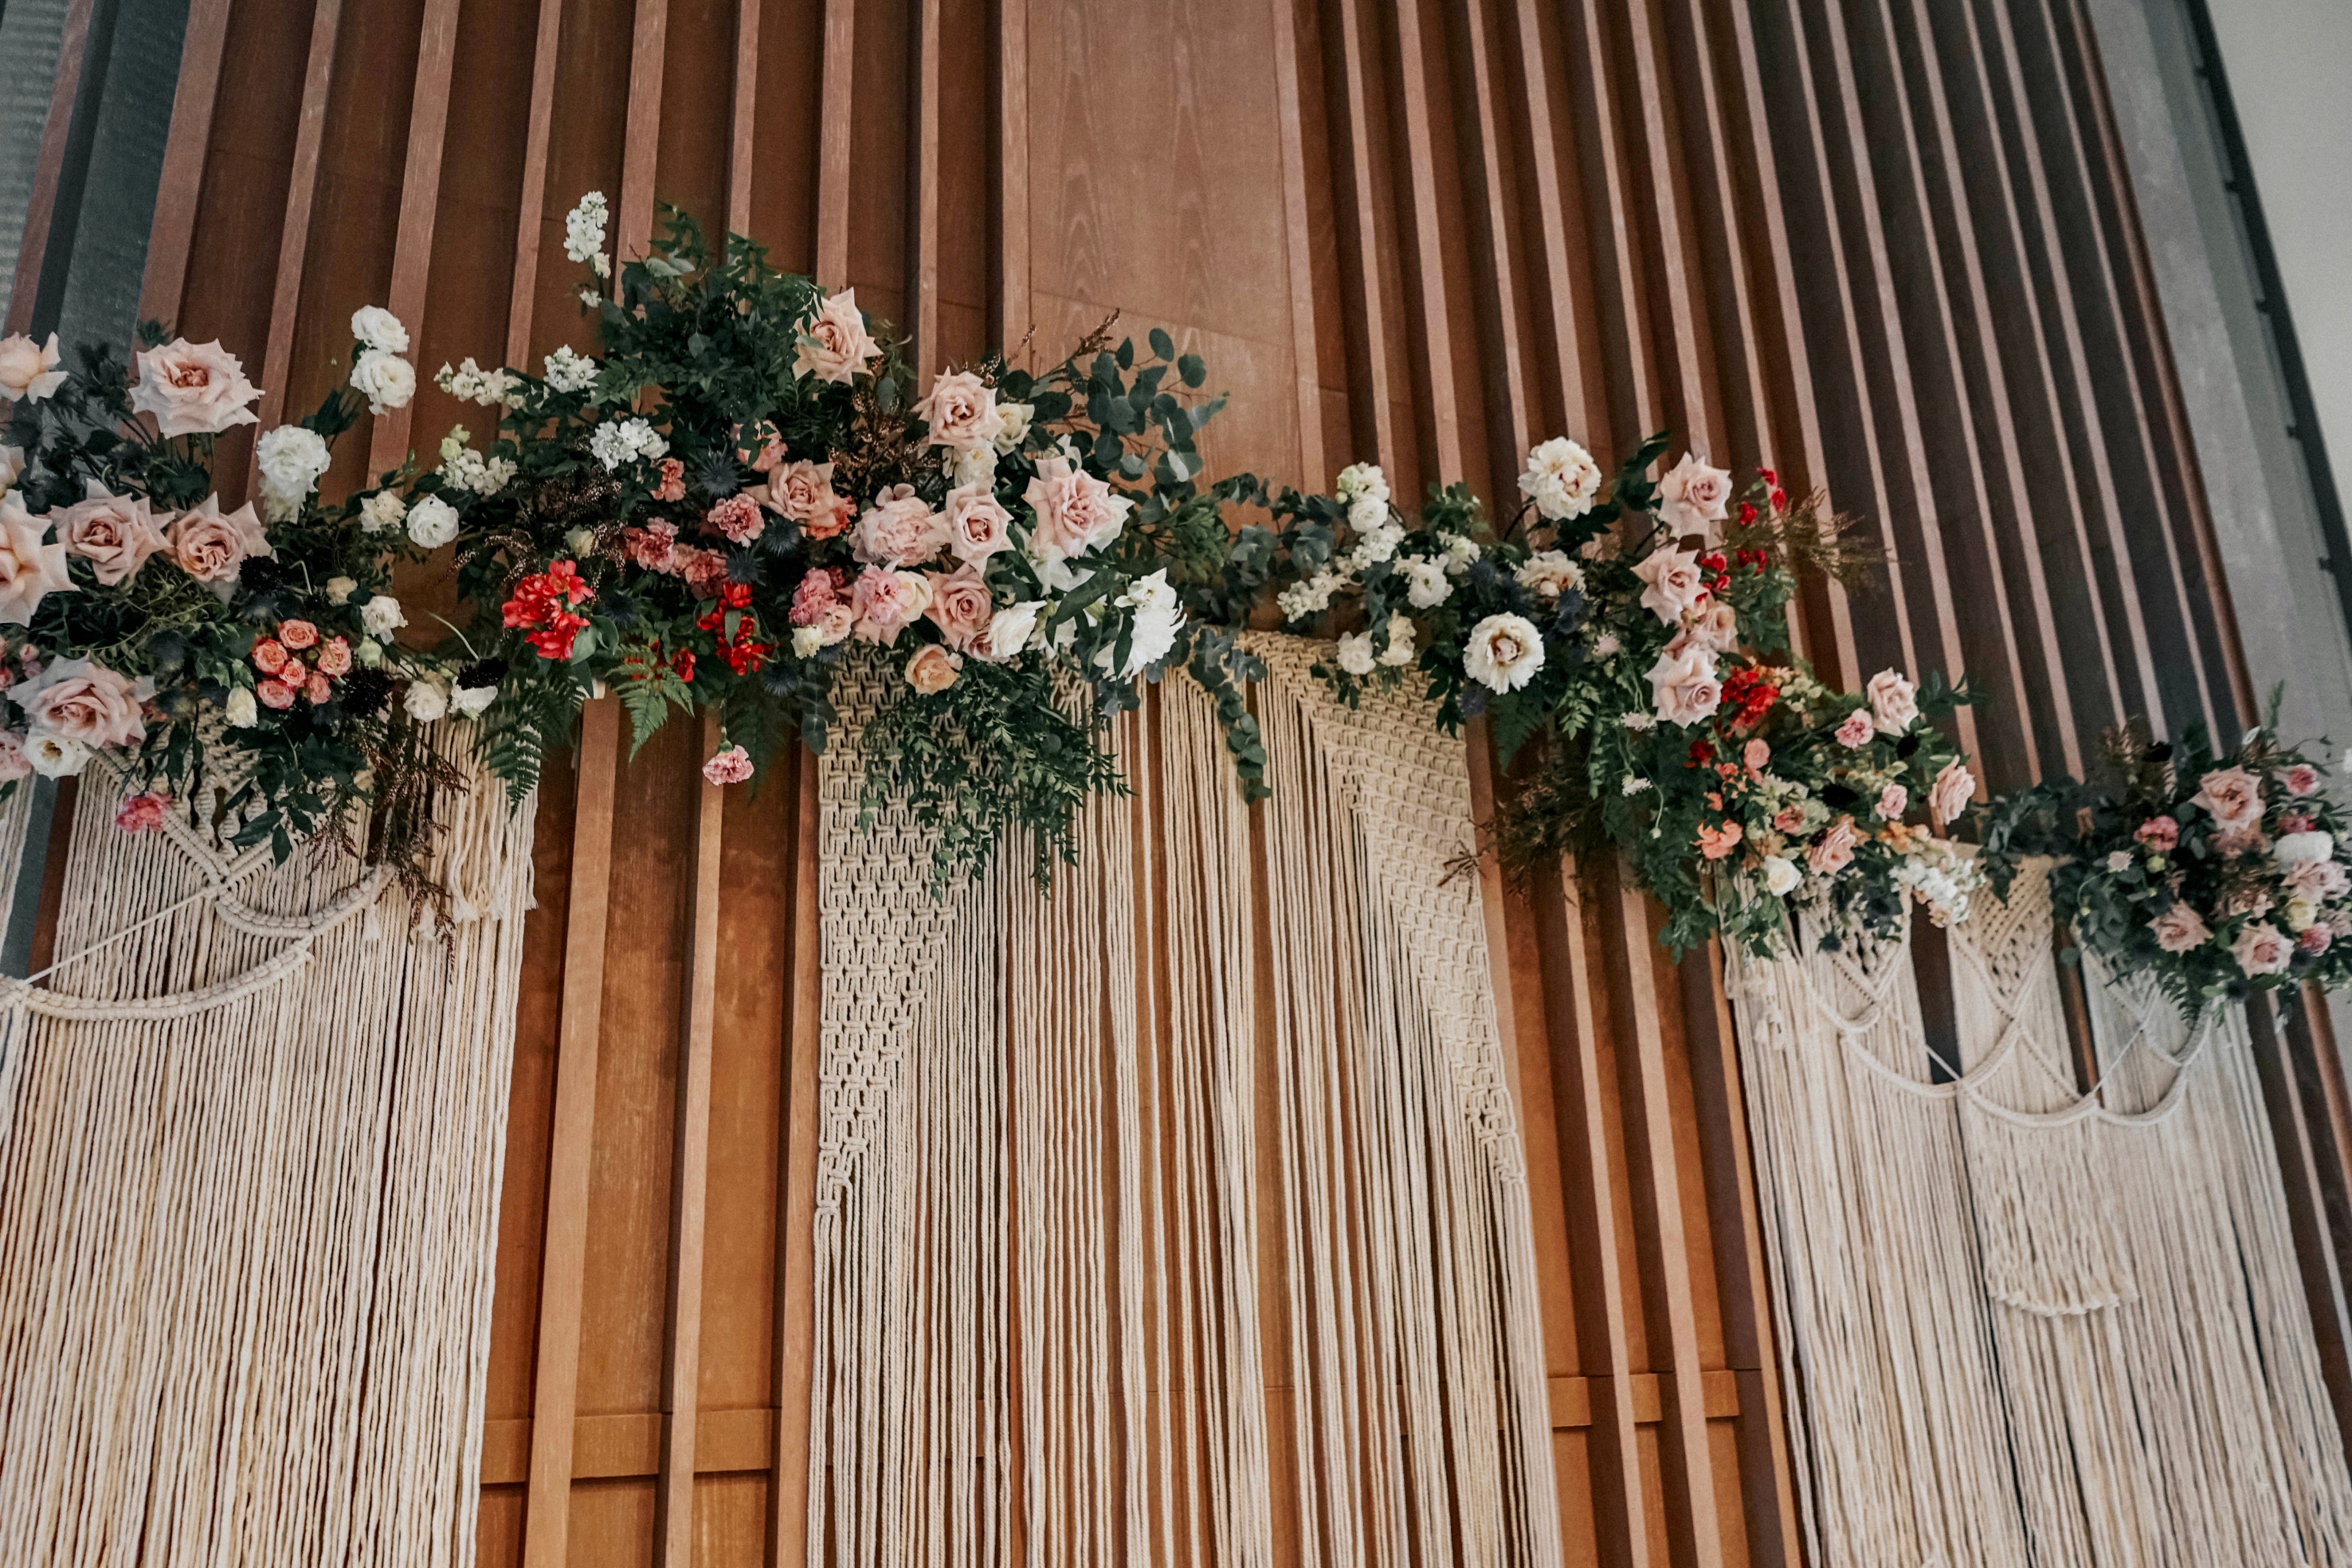 Macrame backdrop and flowers arranged above VIP table for an Andaz Hotel wedding reception